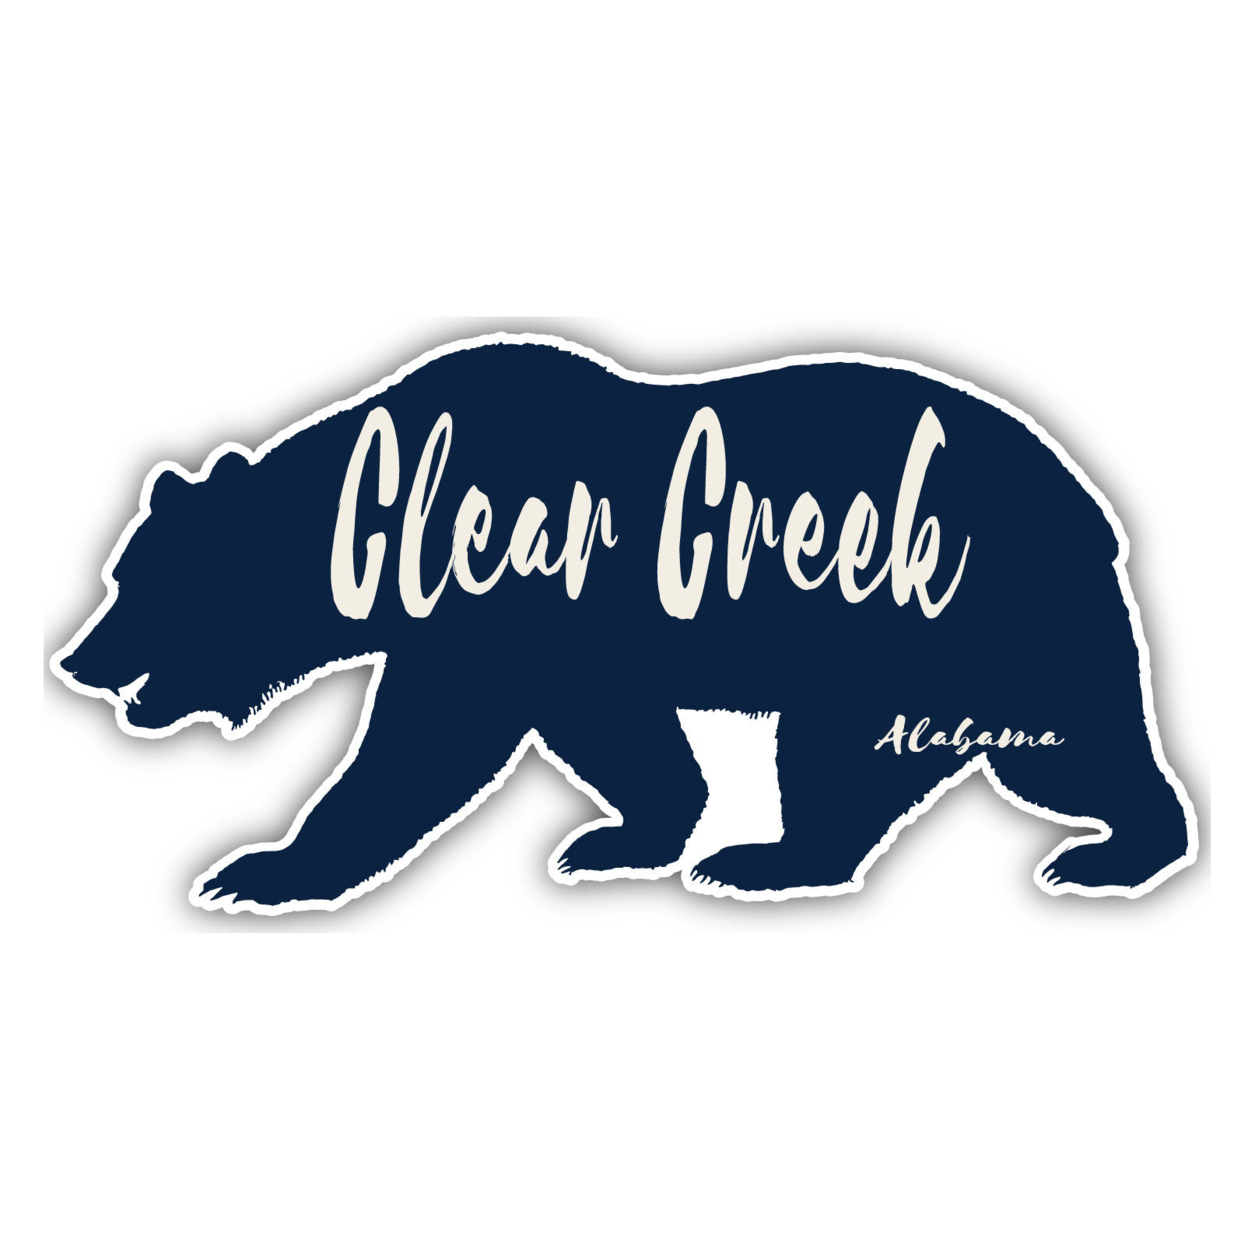 Clear Creek Alabama Souvenir Decorative Stickers (Choose Theme And Size) - 4-Pack, 4-Inch, Bear